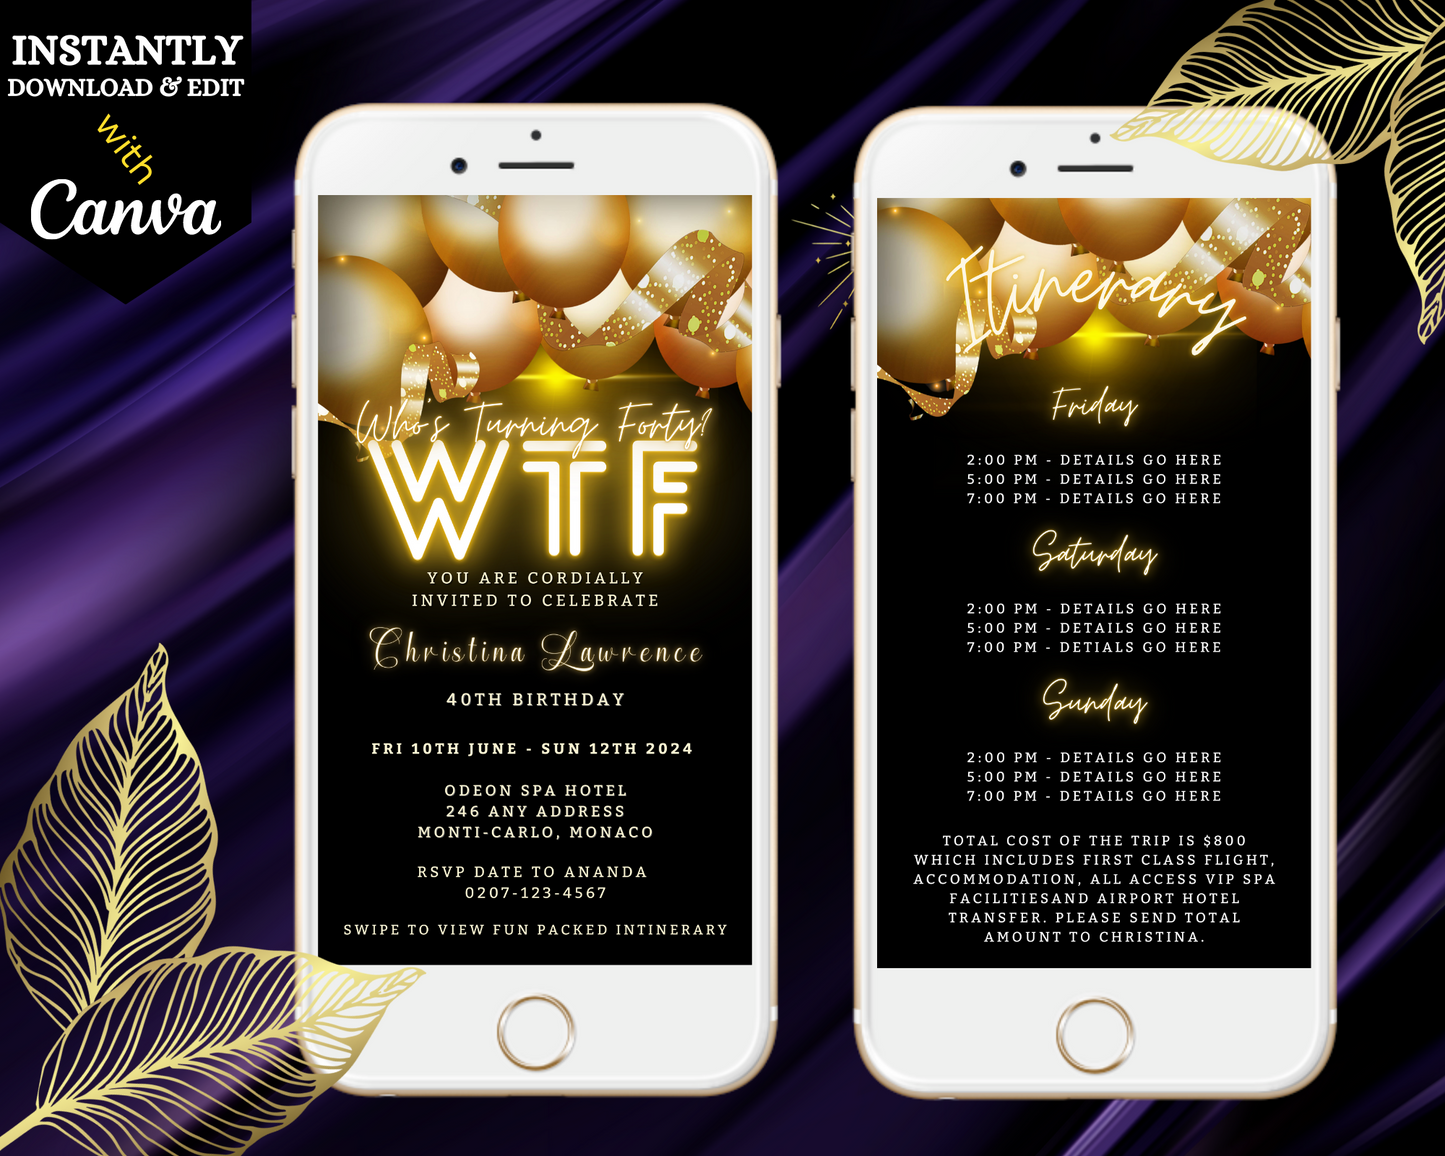 Black Neon Gold Floating Balloons | WTForty Weekend Evite displayed on two iPhones showing customizable invitation and schedule screens.